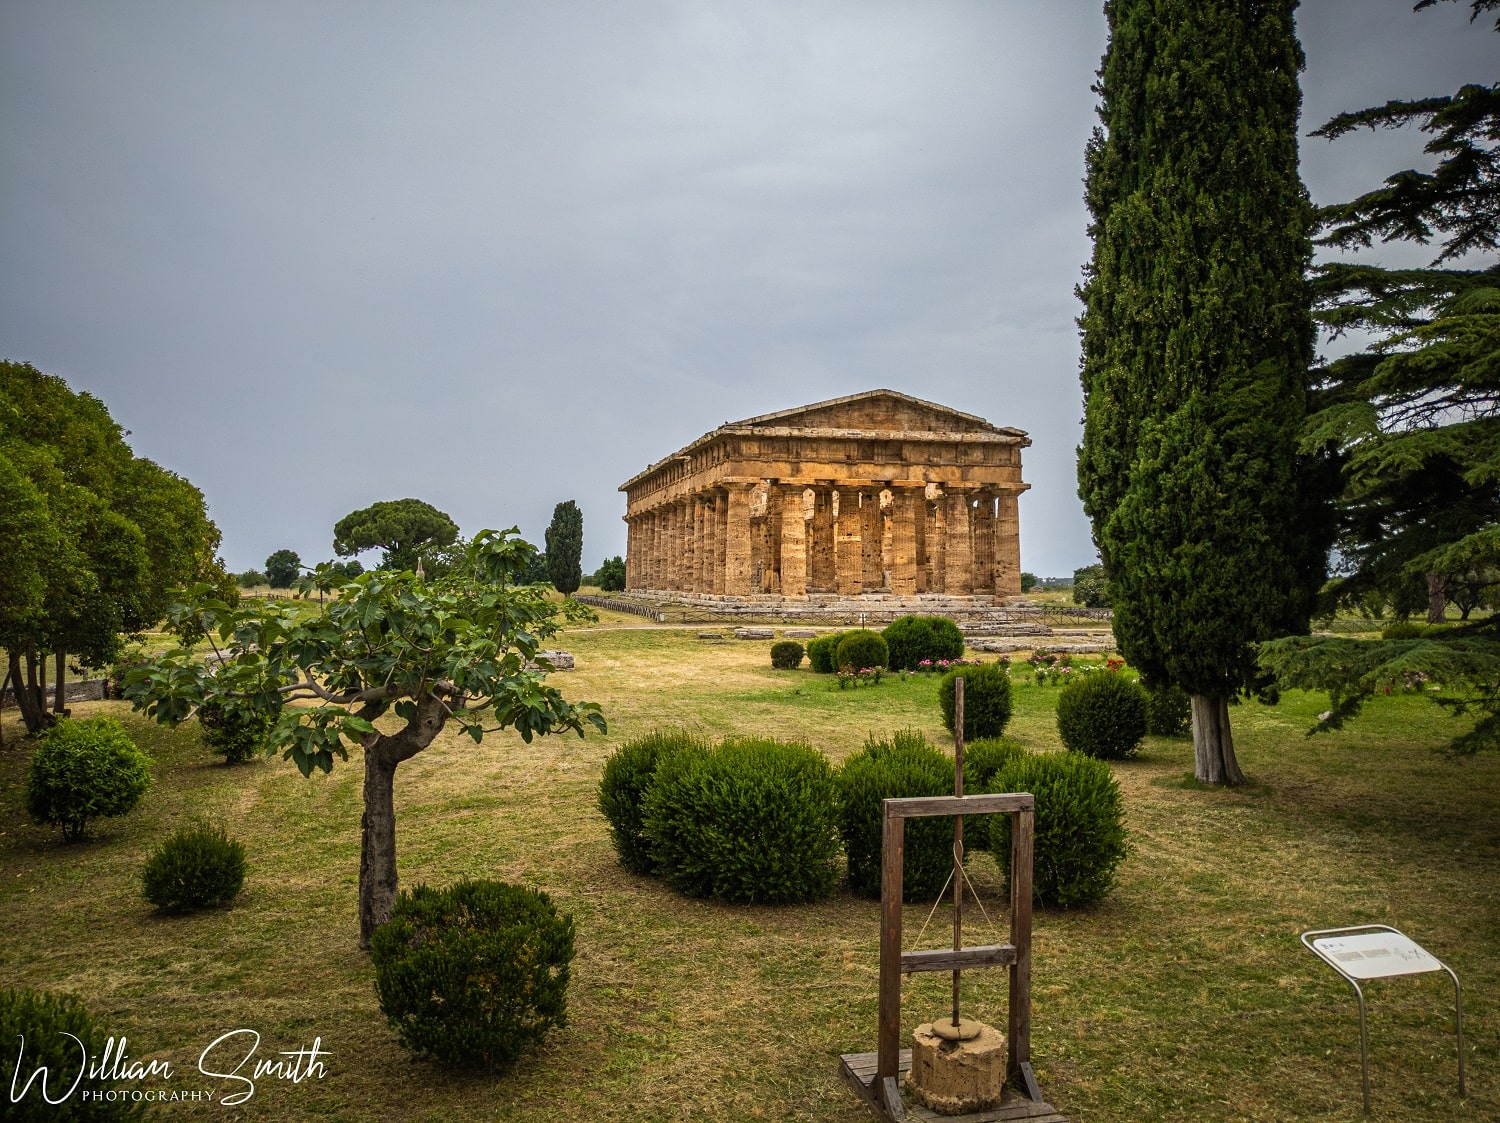 The Greek Temple of Neptune in the archaeological site of Paestum